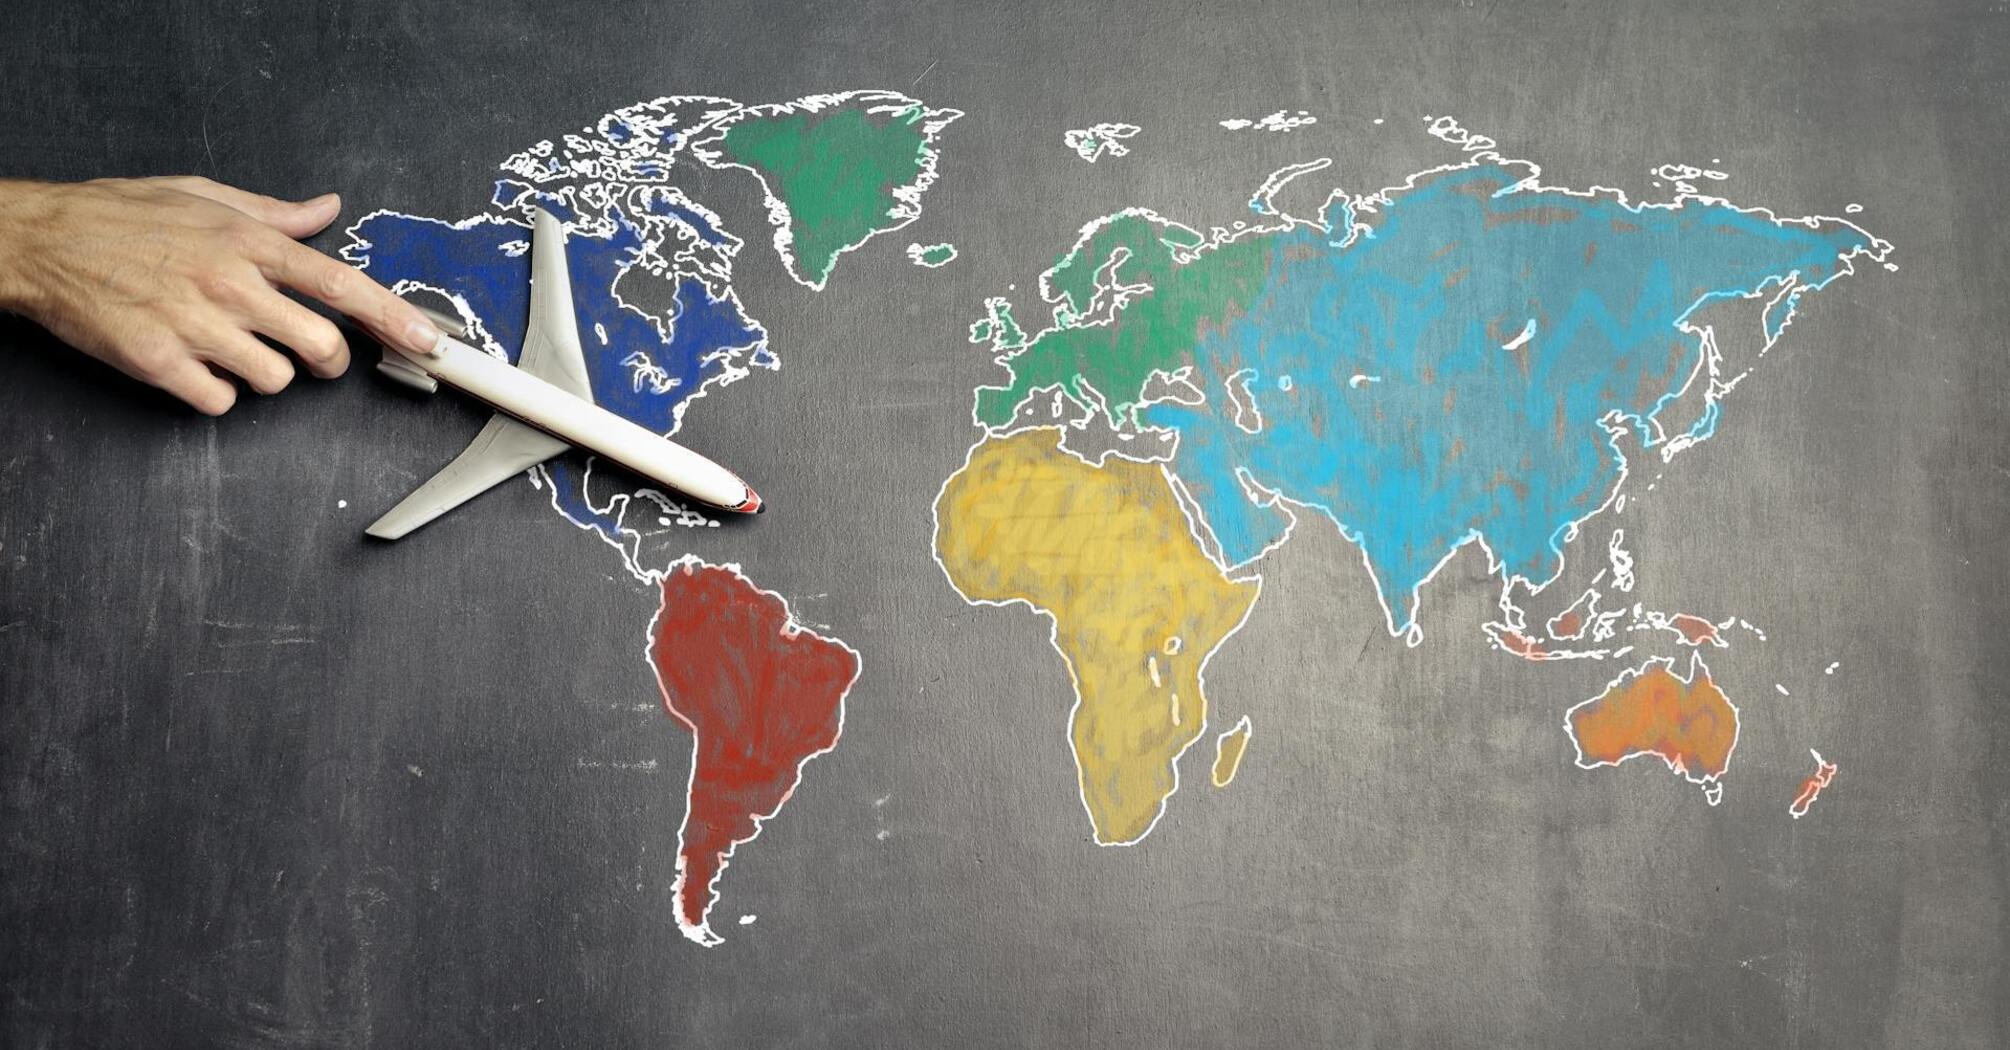 Toy plane on chalkboard map of the world